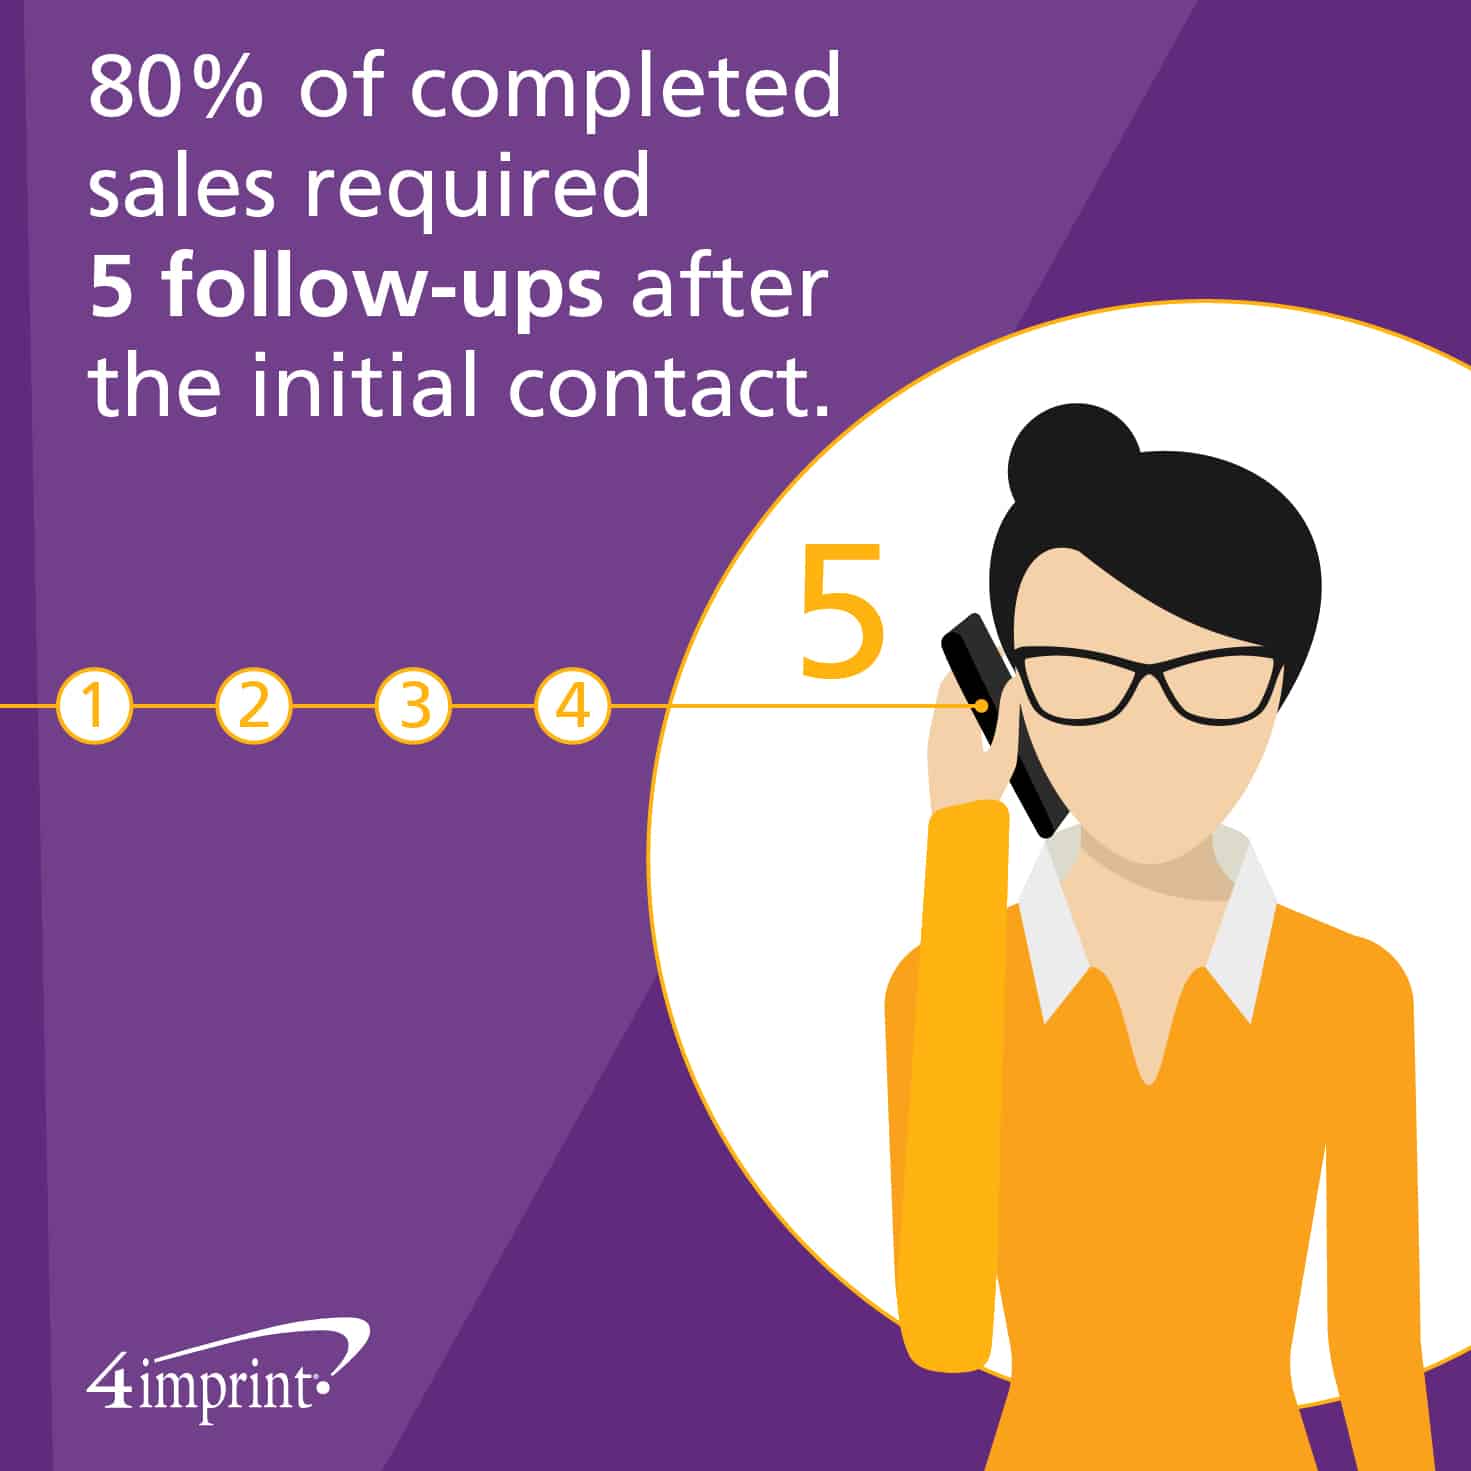 80% of completed sales required 5 follow-ups after the initial contact. 